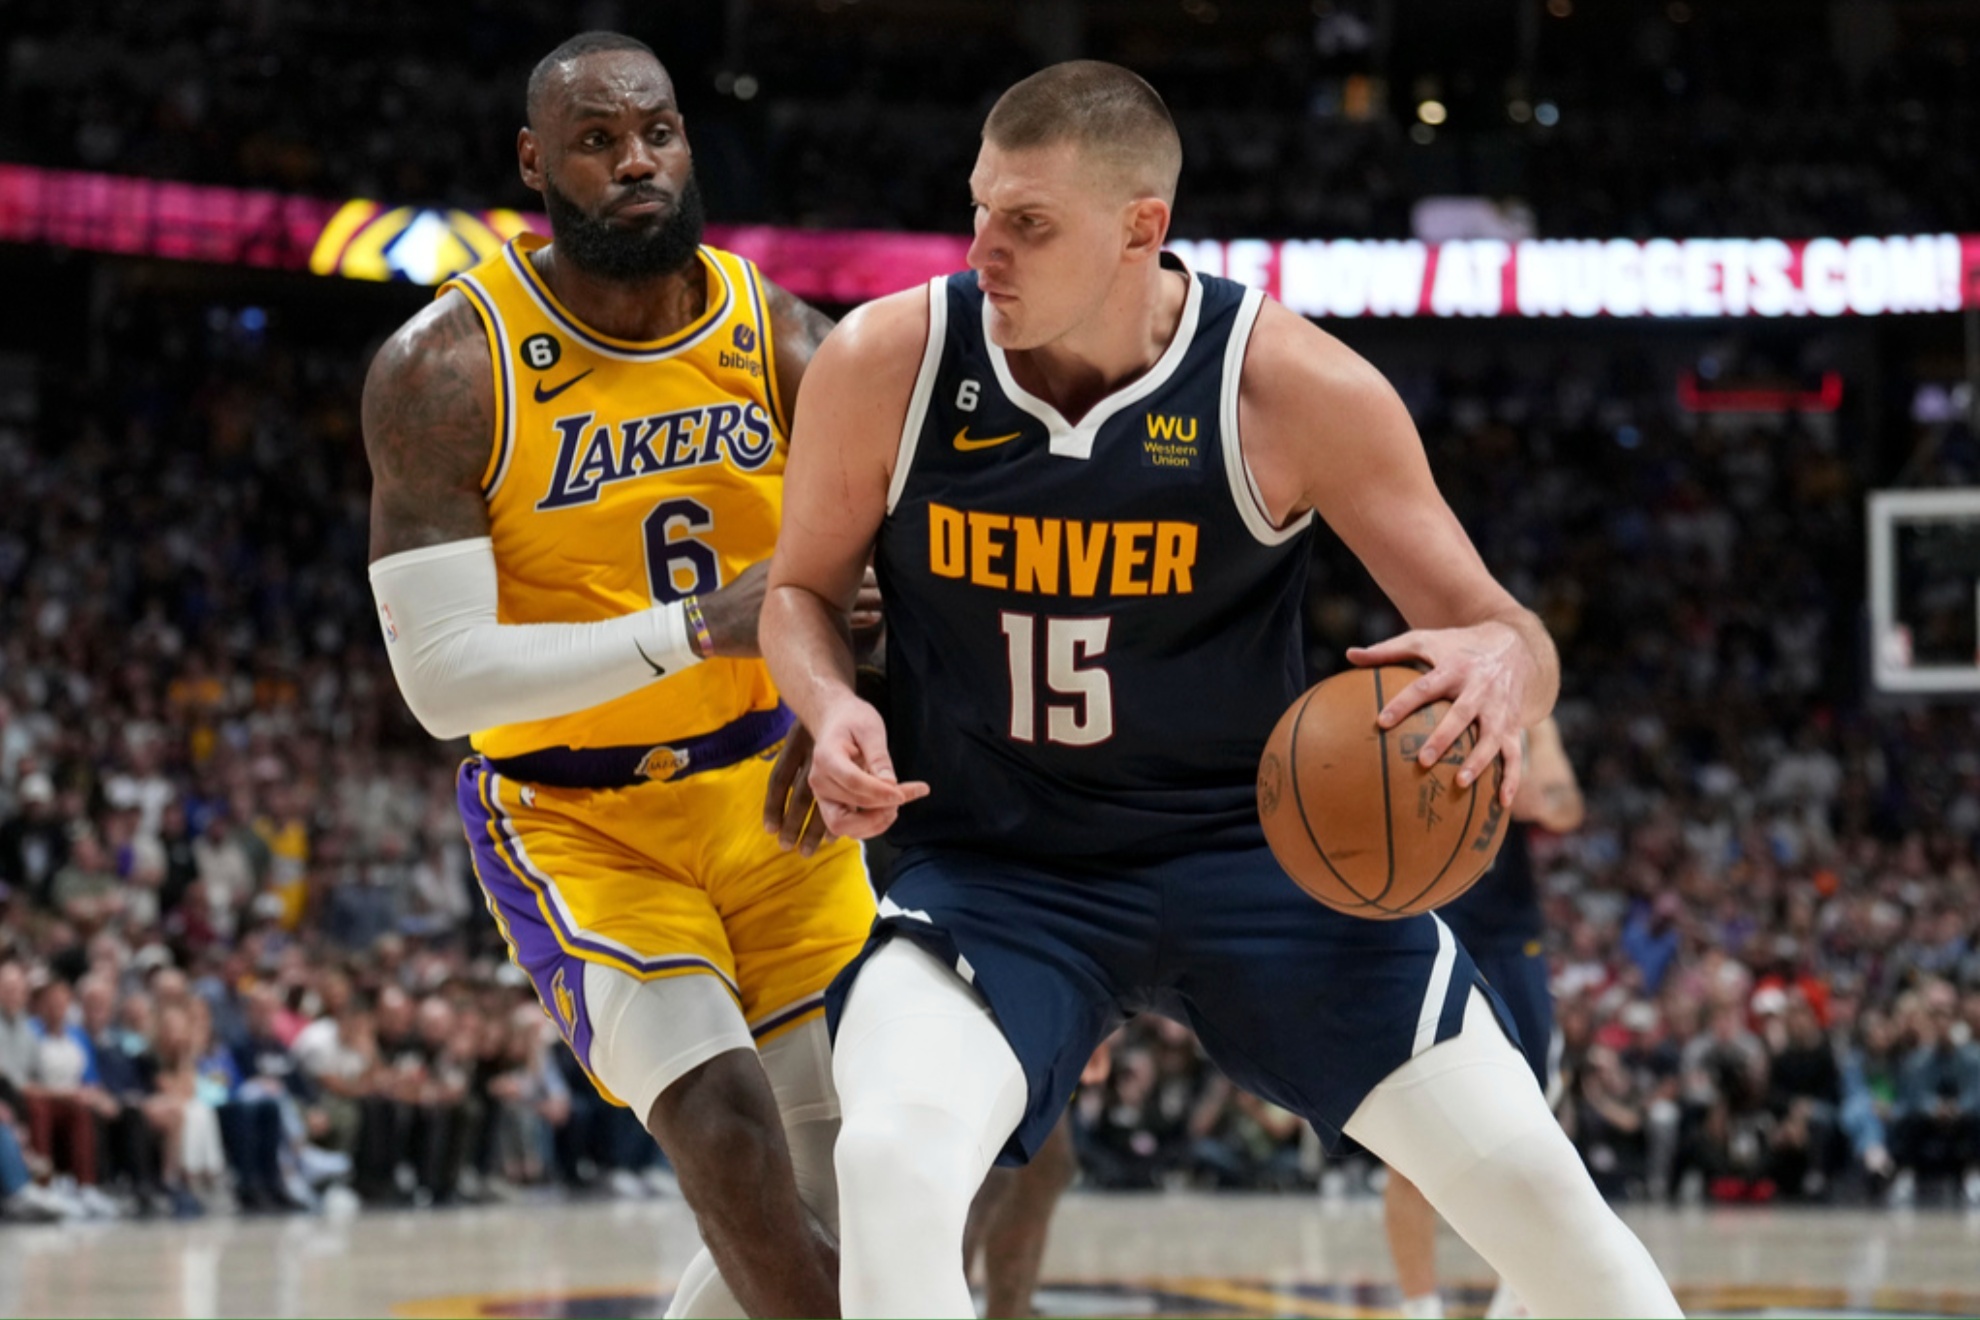 The Denver Nuggest will host the Los Angeles Lakers in the first game of the NBA's 2023-24 season